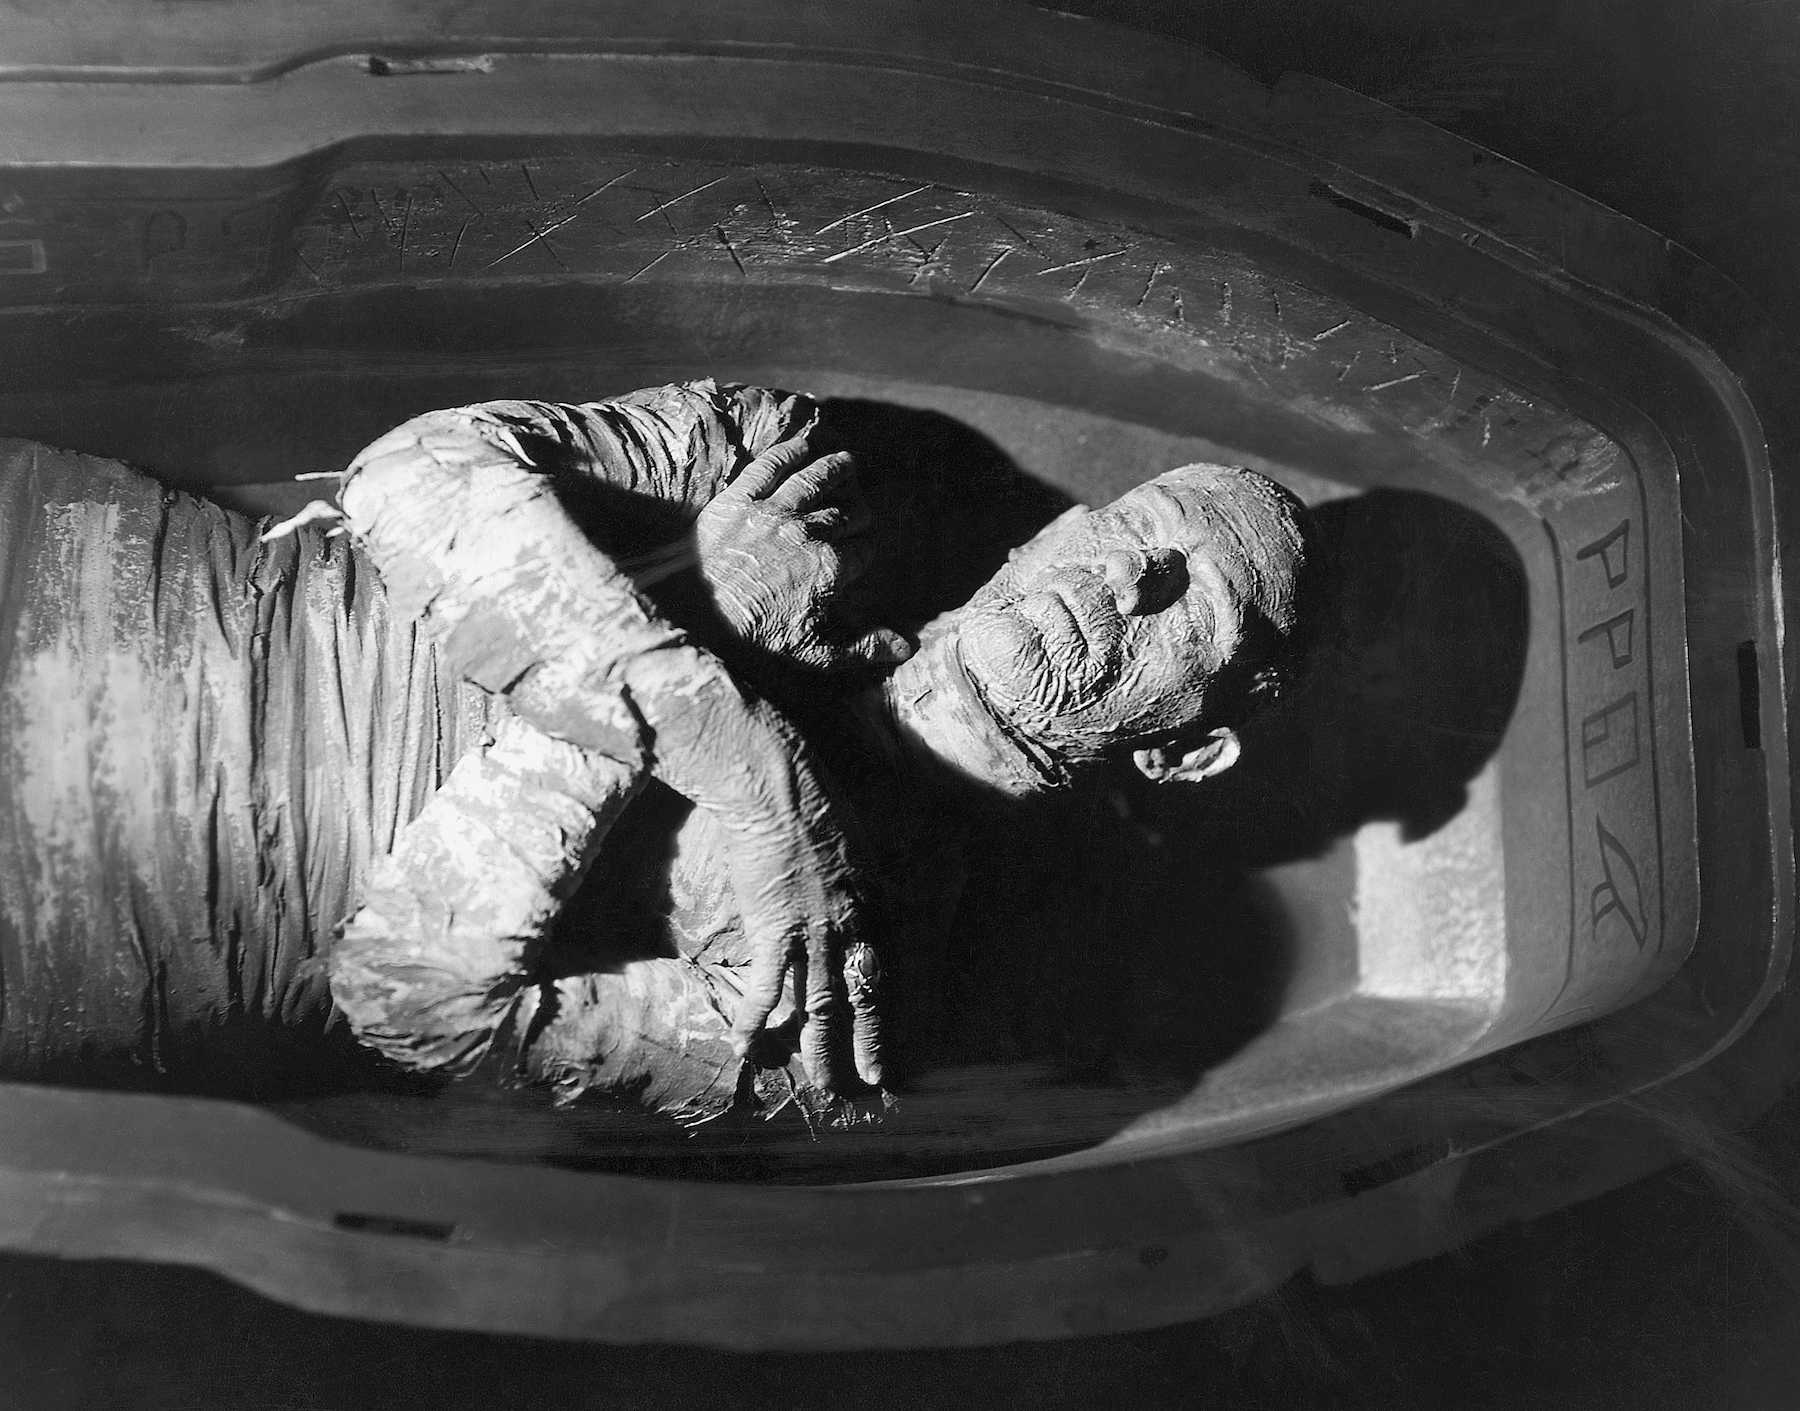 Boris Karloff in the 1932 motion picture The Mummy. A poster from "The Mummy" may fetch more than $1 million at auction this month. Photo by Bettmann / Contributor / Getty Images